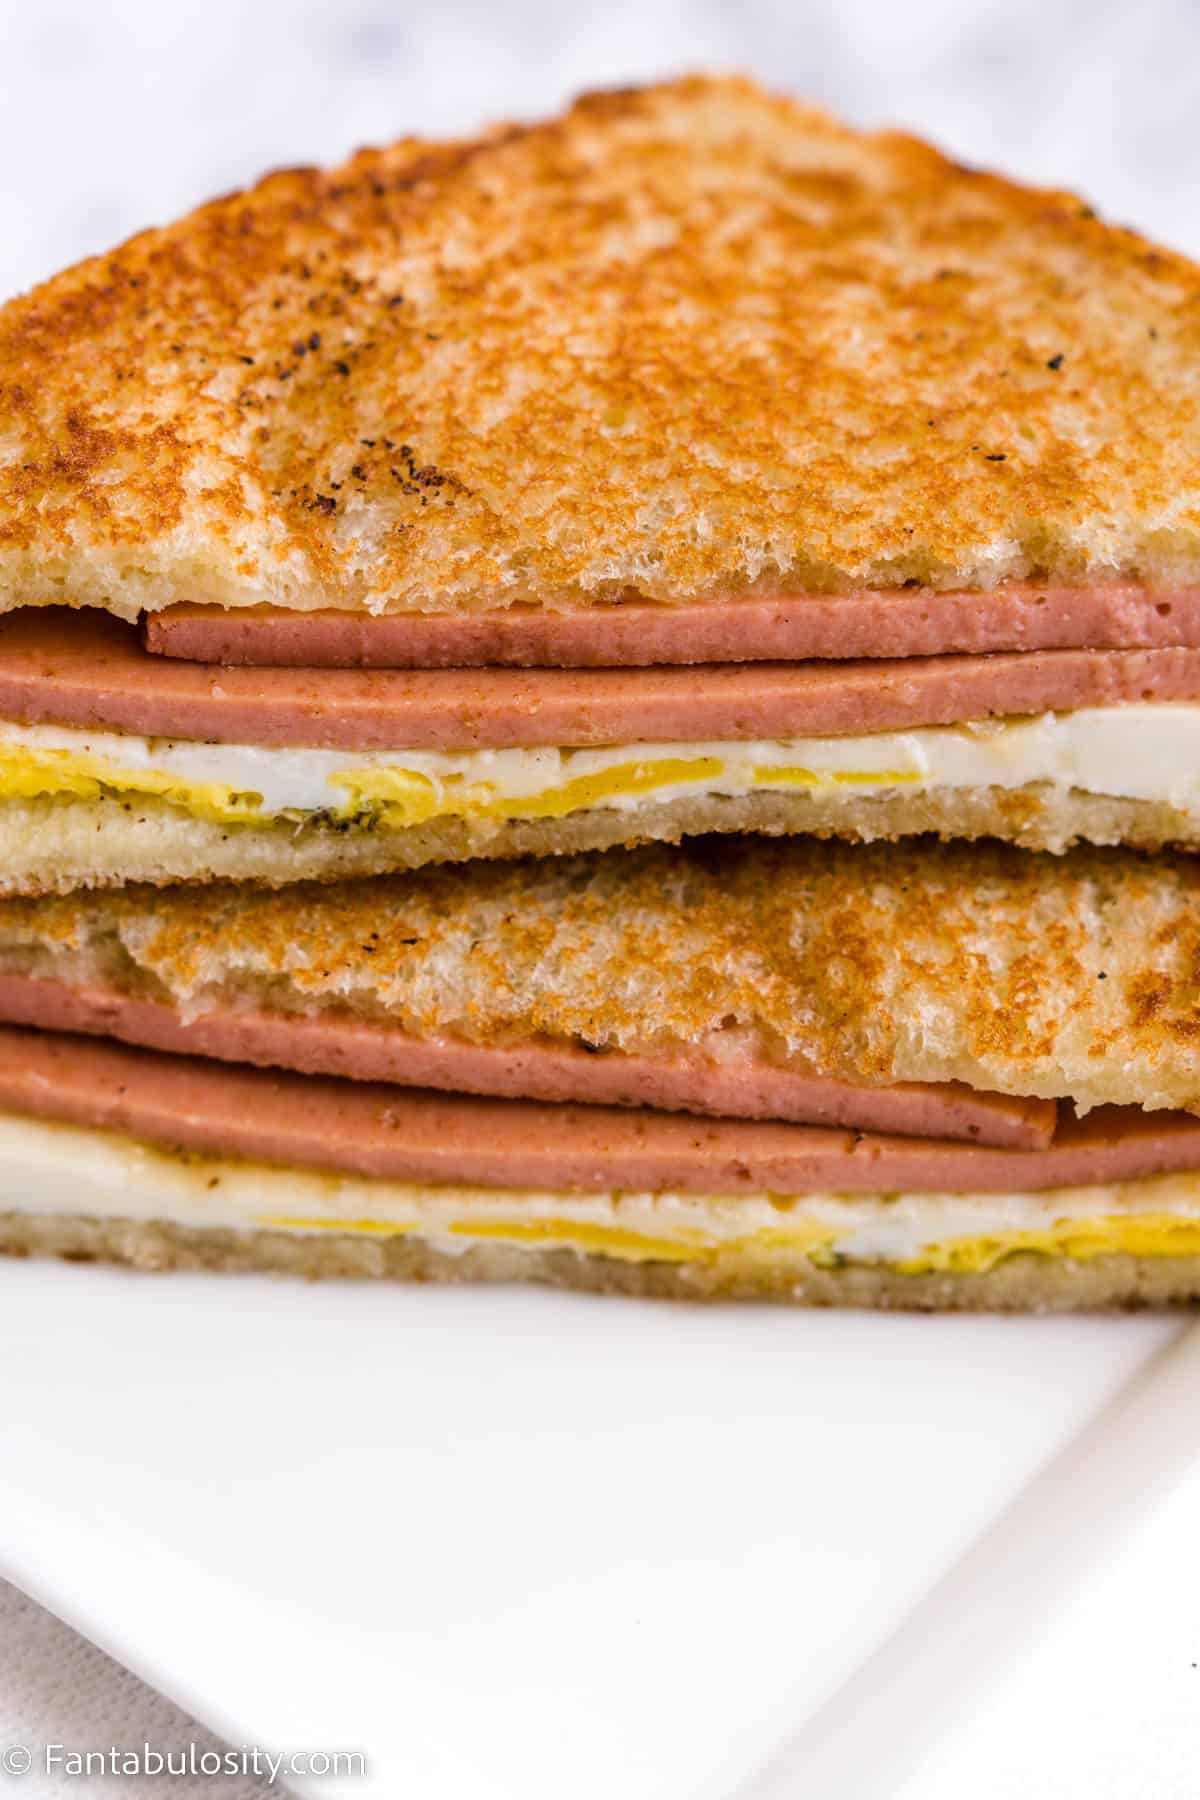 Fried bologna and egg sandwich on white plate